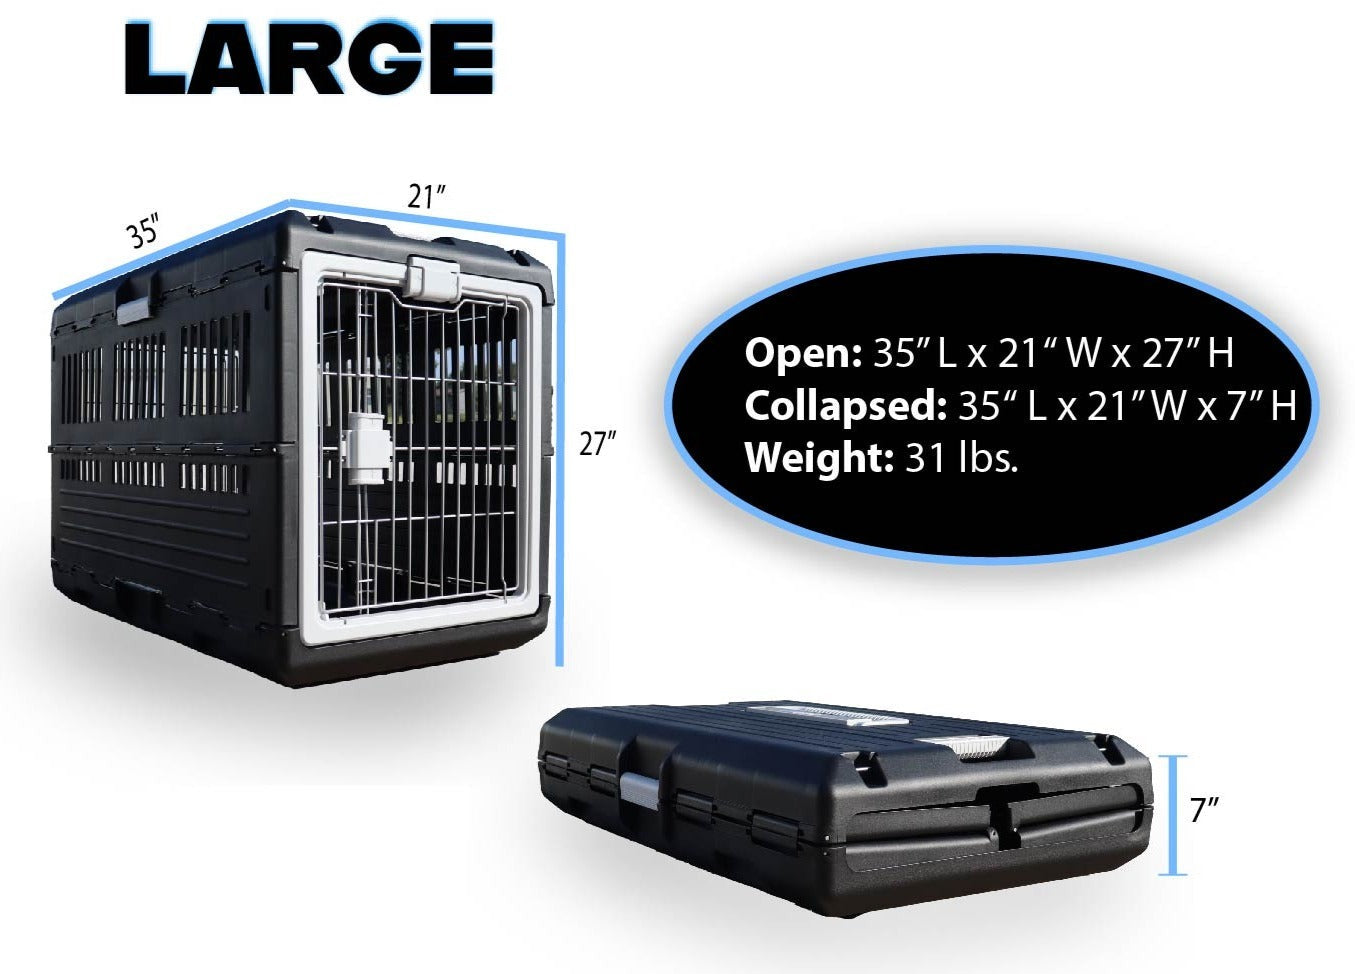 A photo of the Mirapet Large Collapsible pet crate standing, and also closed with measurements around the sides. A black oval with white text that says "Open: 35' L x 21" W x 27"H Collapsed: 35"L x 21"W x7"H Weight: 31lbs 